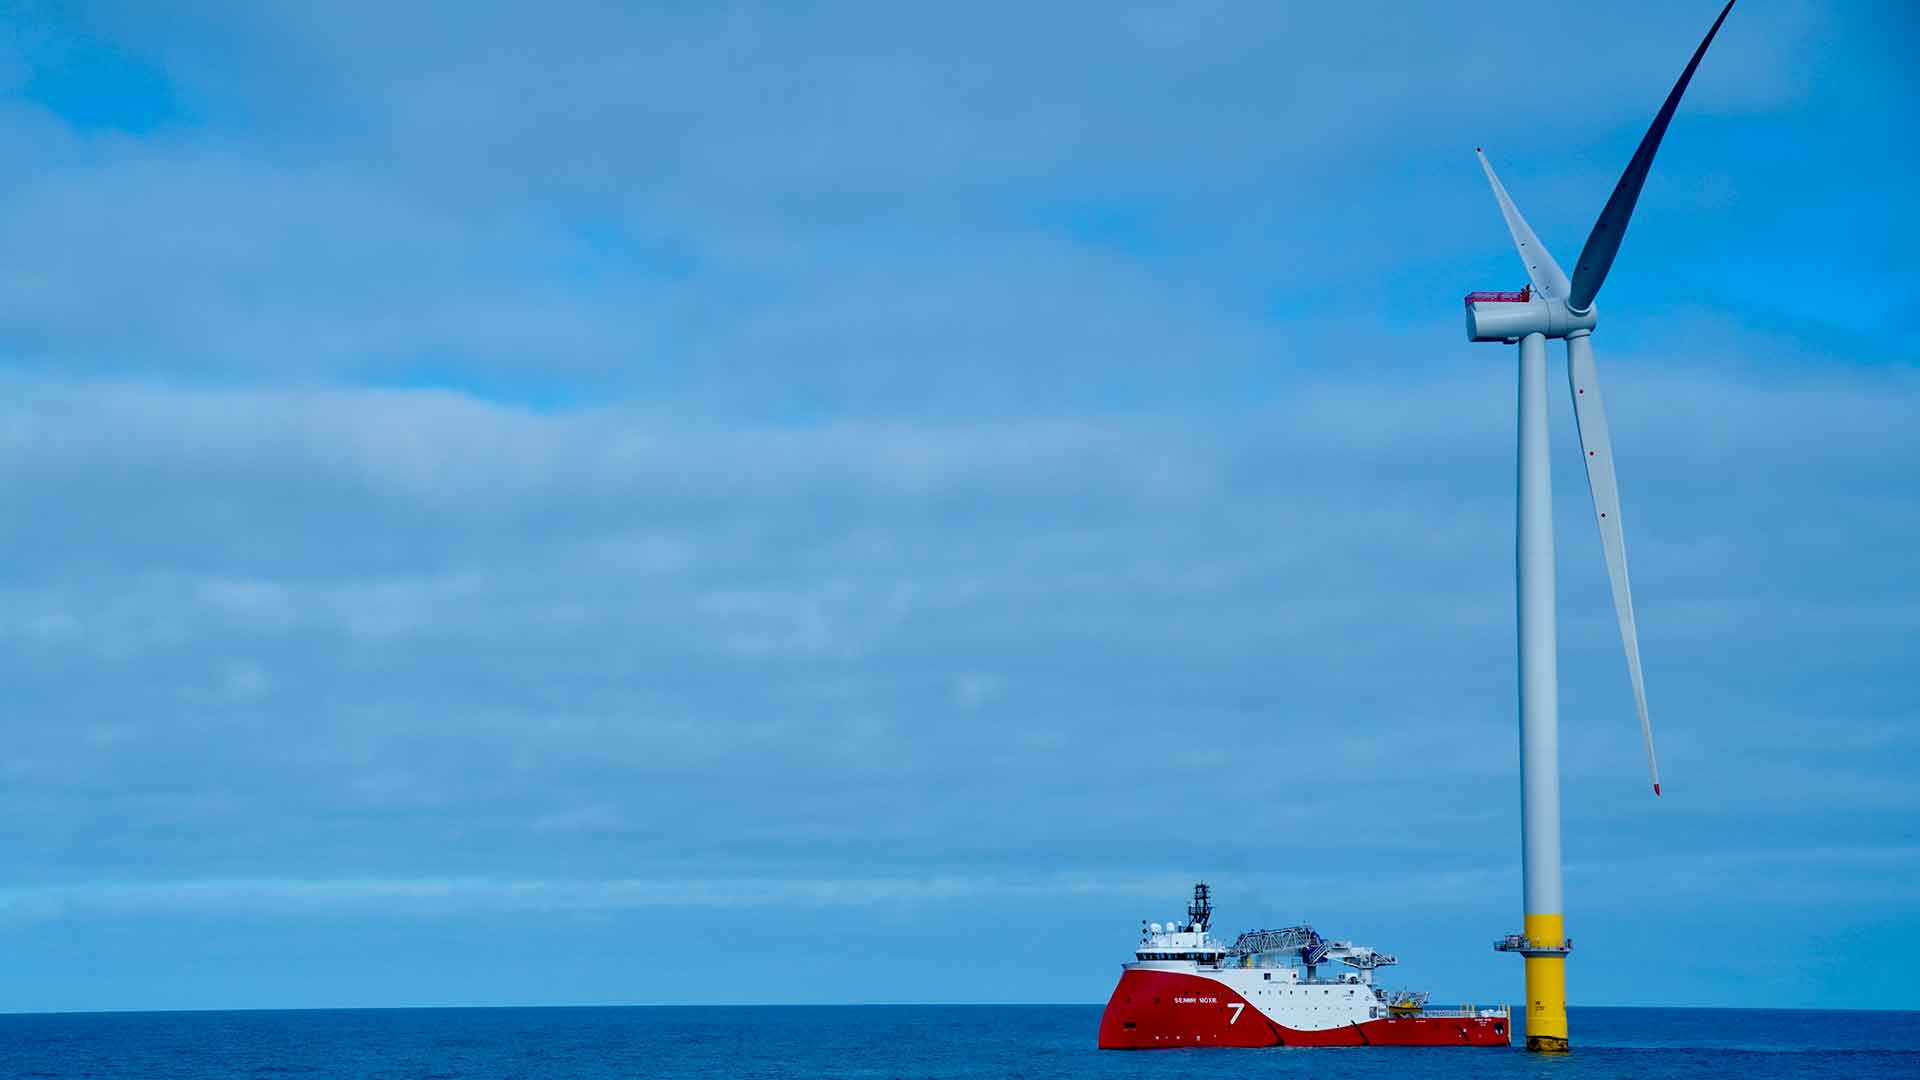 A photo of Subsea 7's vessel next to a wind turbine at sea